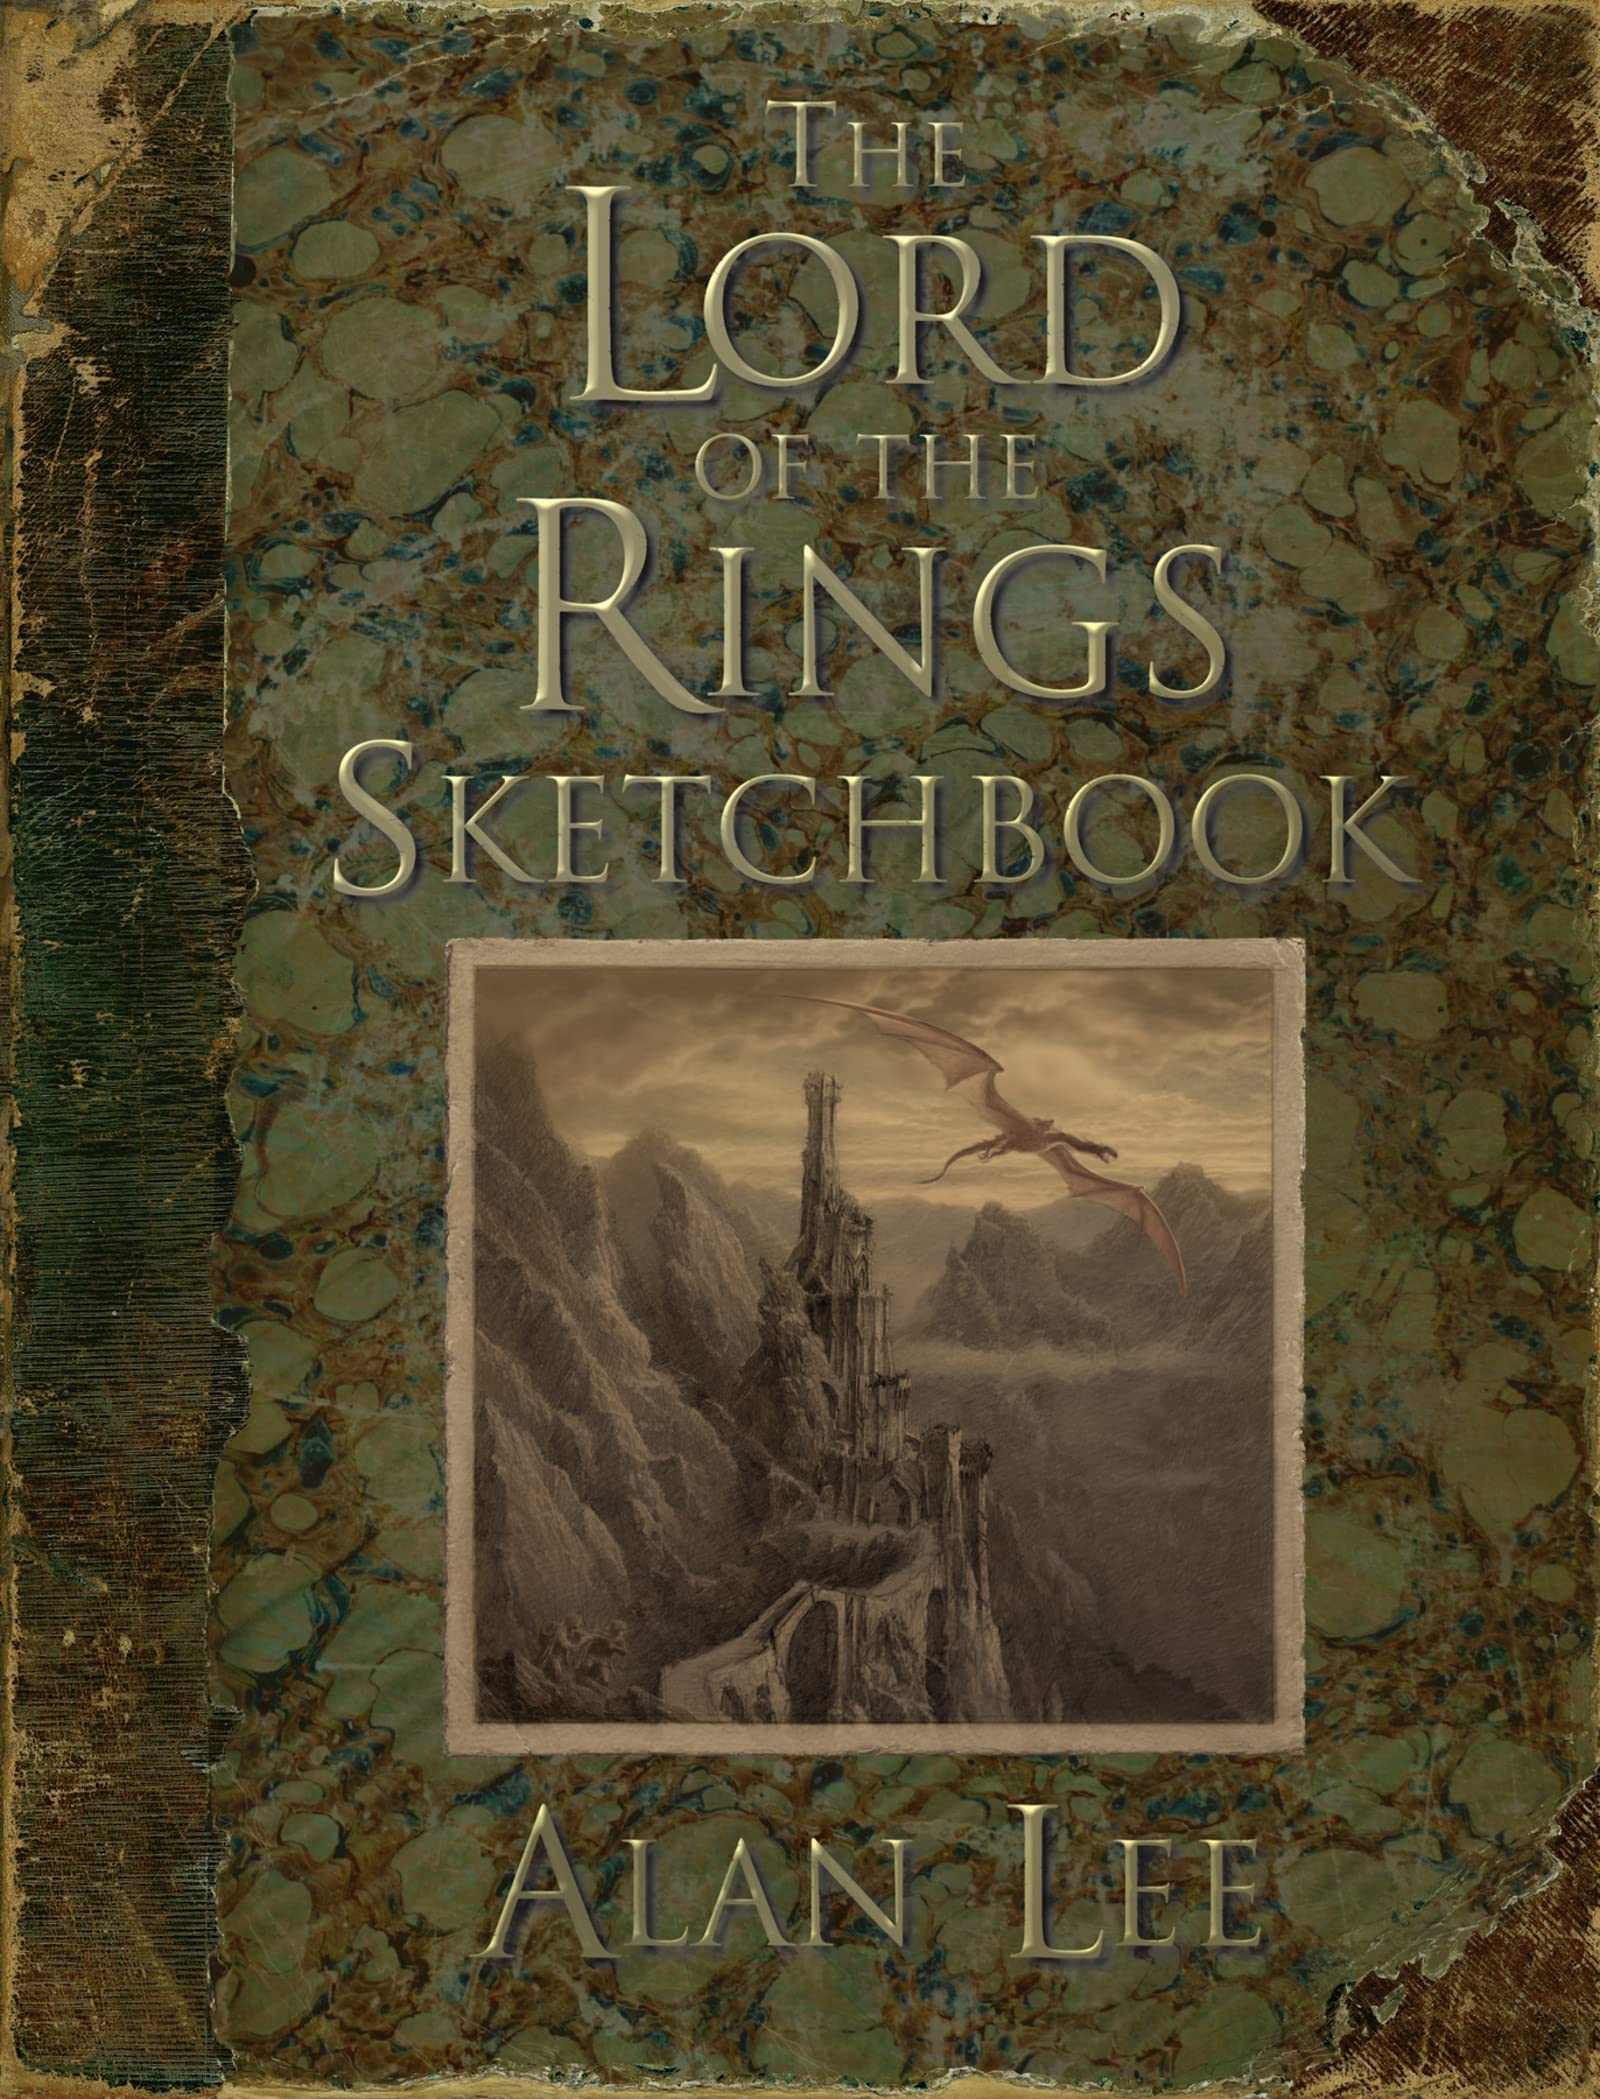 https://static.wikia.nocookie.net/lotr/images/5/5b/TheLOTRSketchbook.jpg/revision/latest?cb=20221219221157